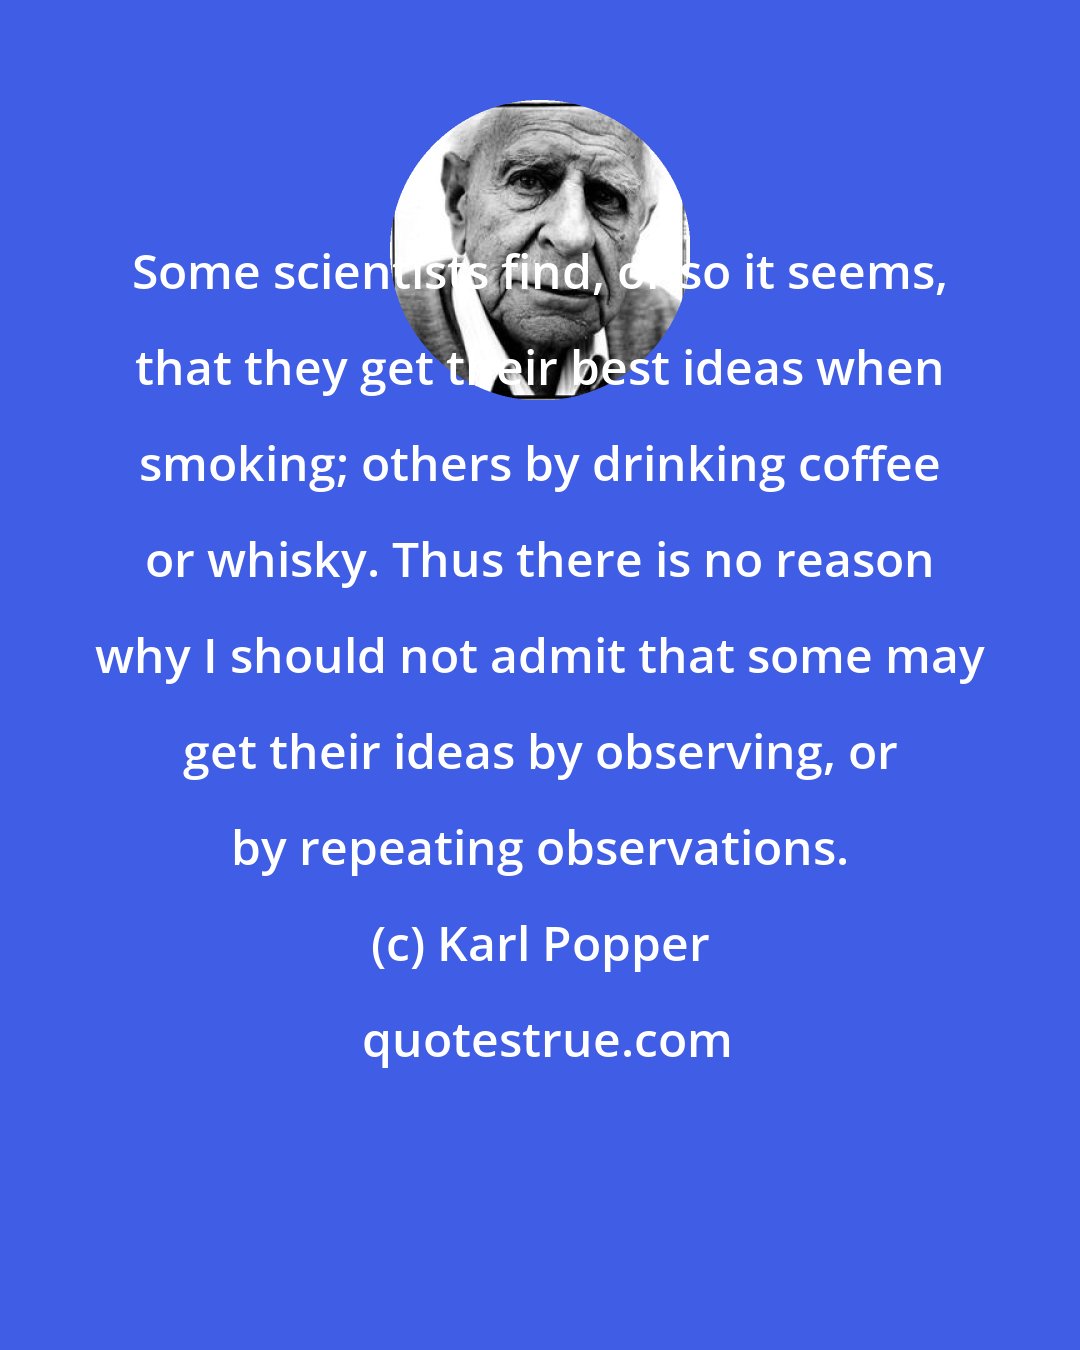 Karl Popper: Some scientists find, or so it seems, that they get their best ideas when smoking; others by drinking coffee or whisky. Thus there is no reason why I should not admit that some may get their ideas by observing, or by repeating observations.